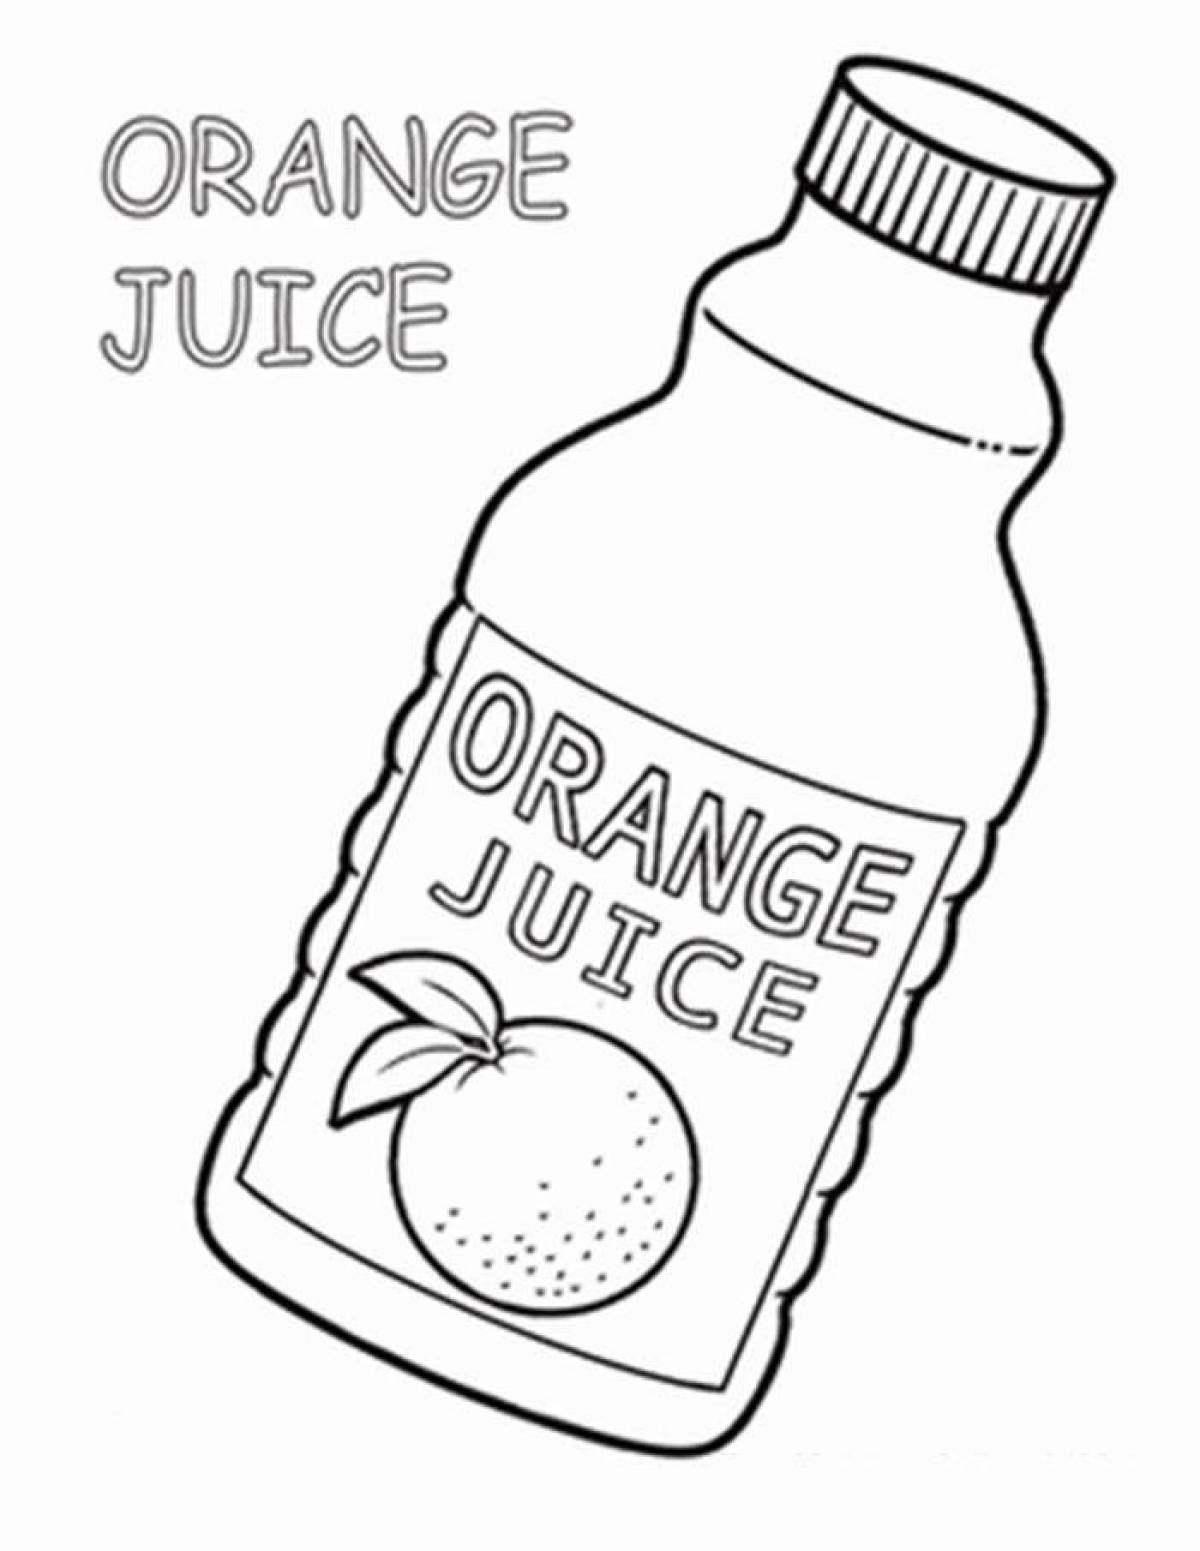 Refined juice coloring page